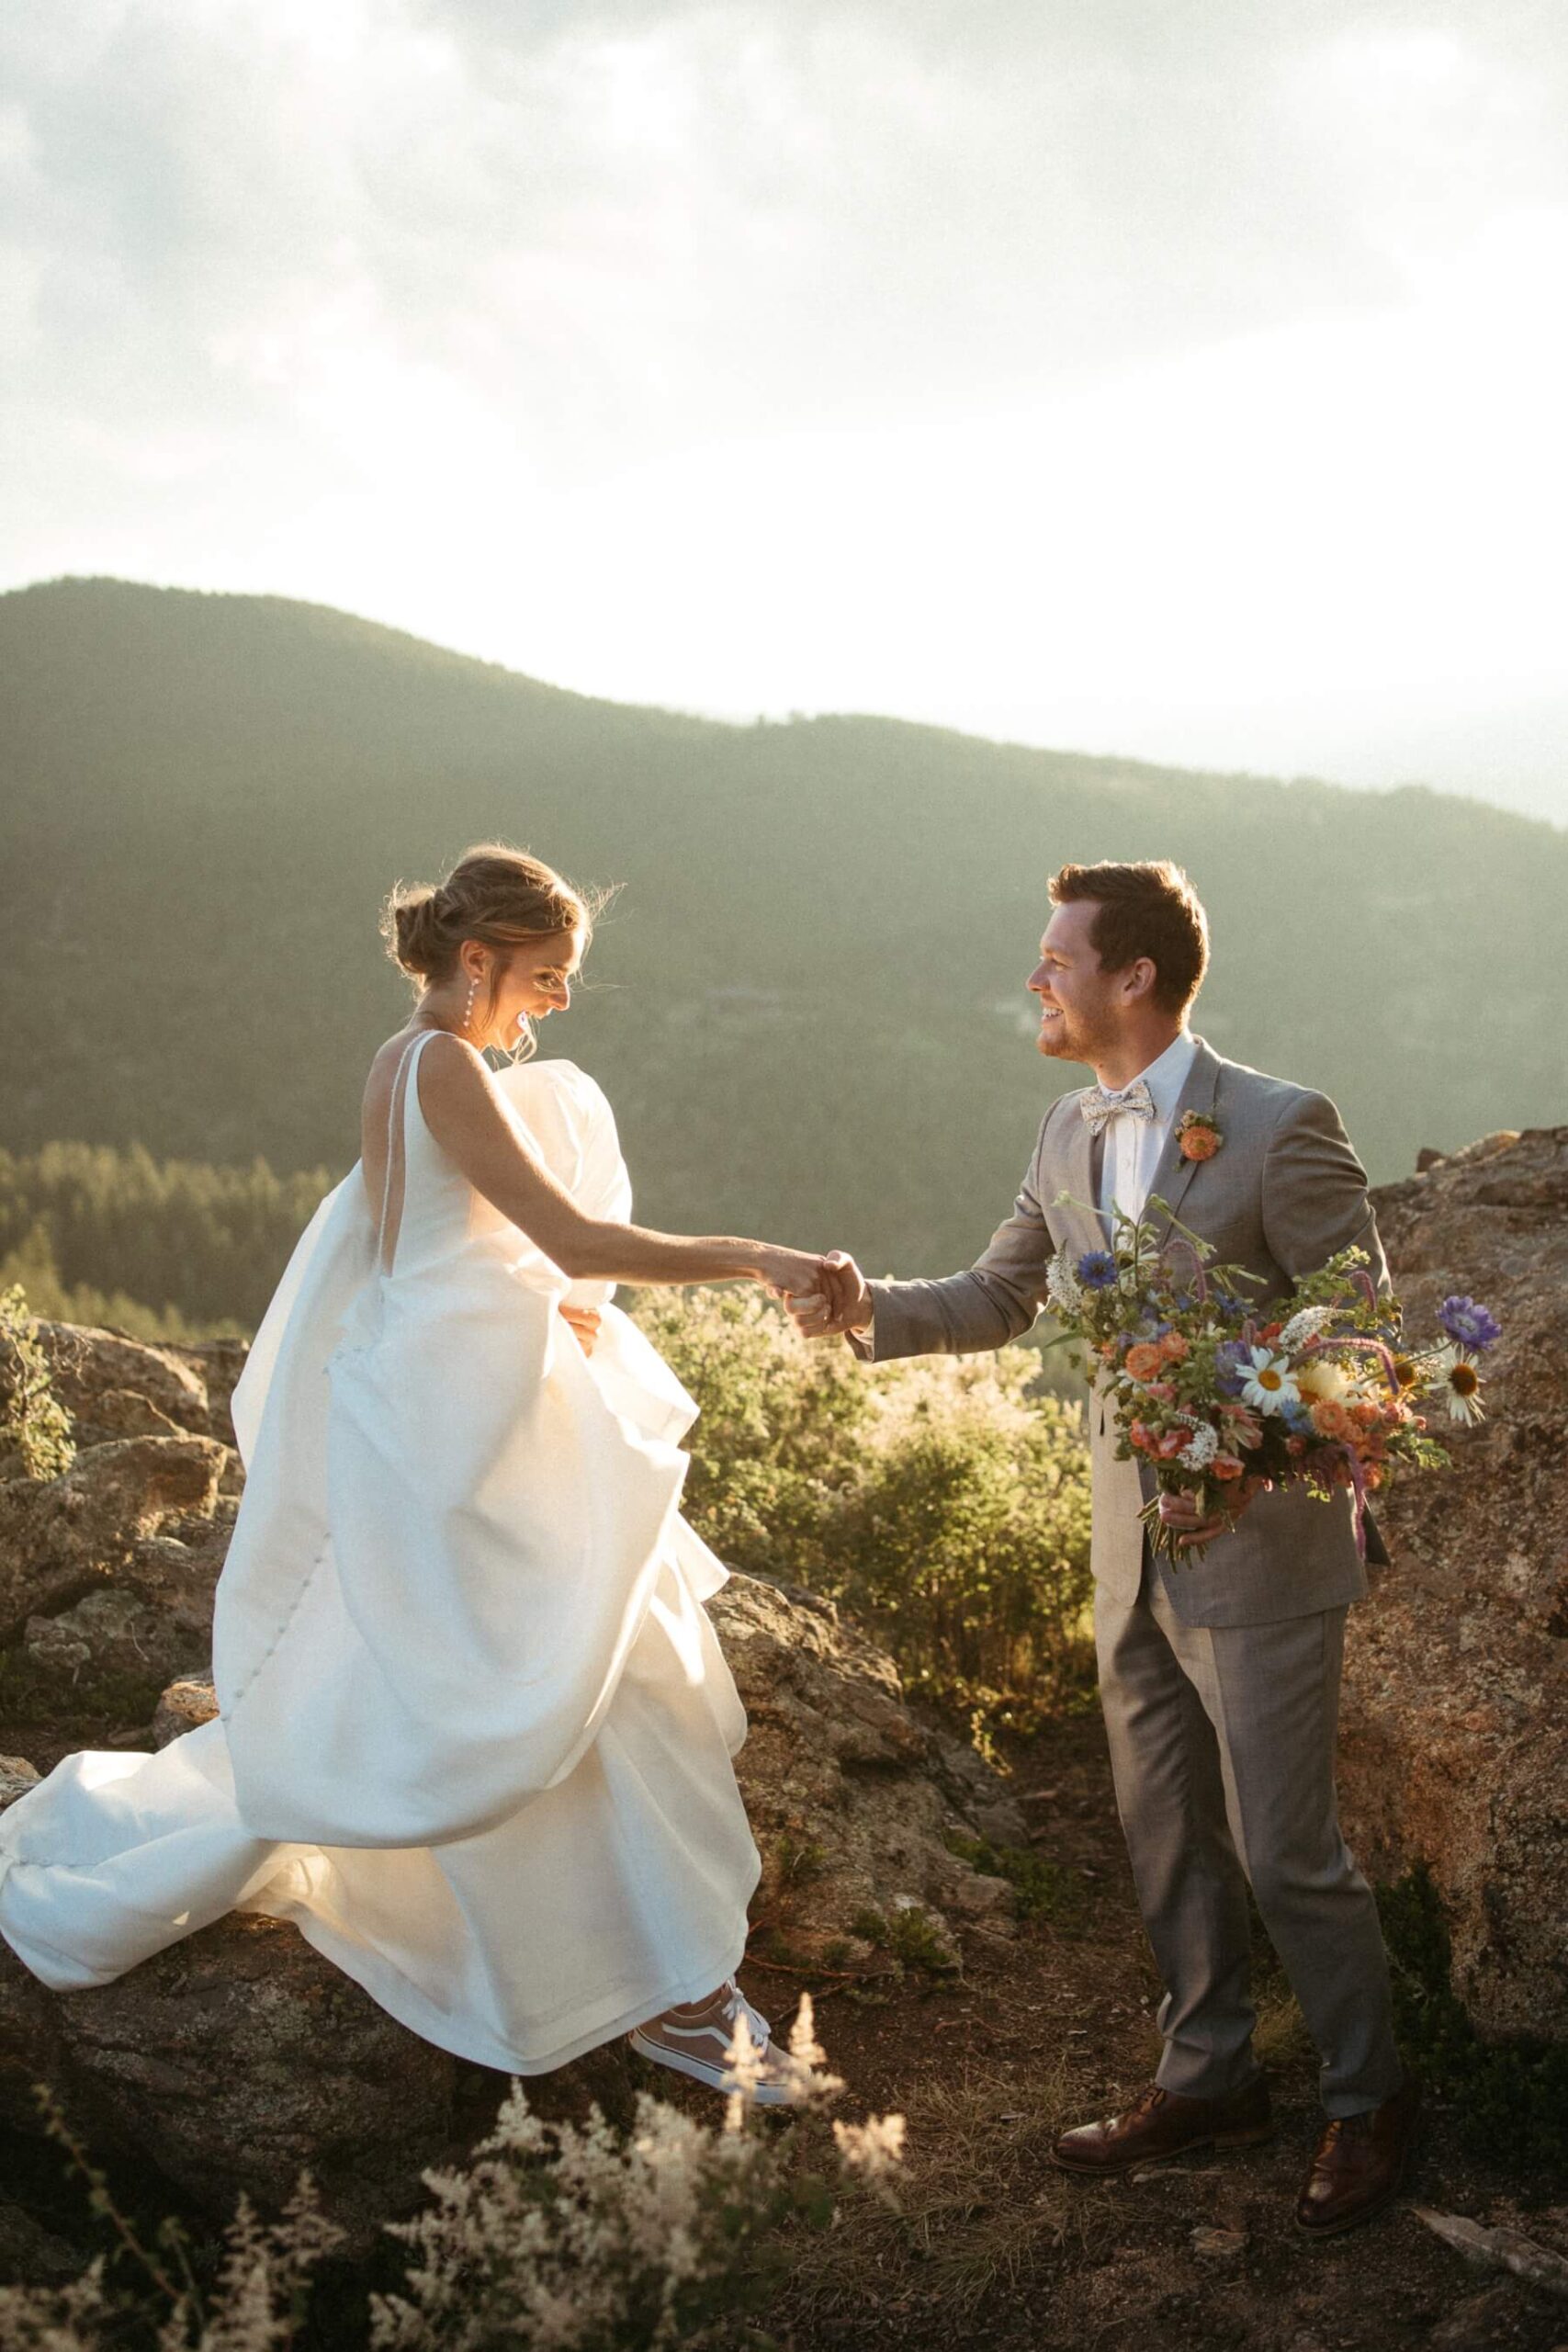 Groom helping bride climb down from rocks while holding her bouquet 